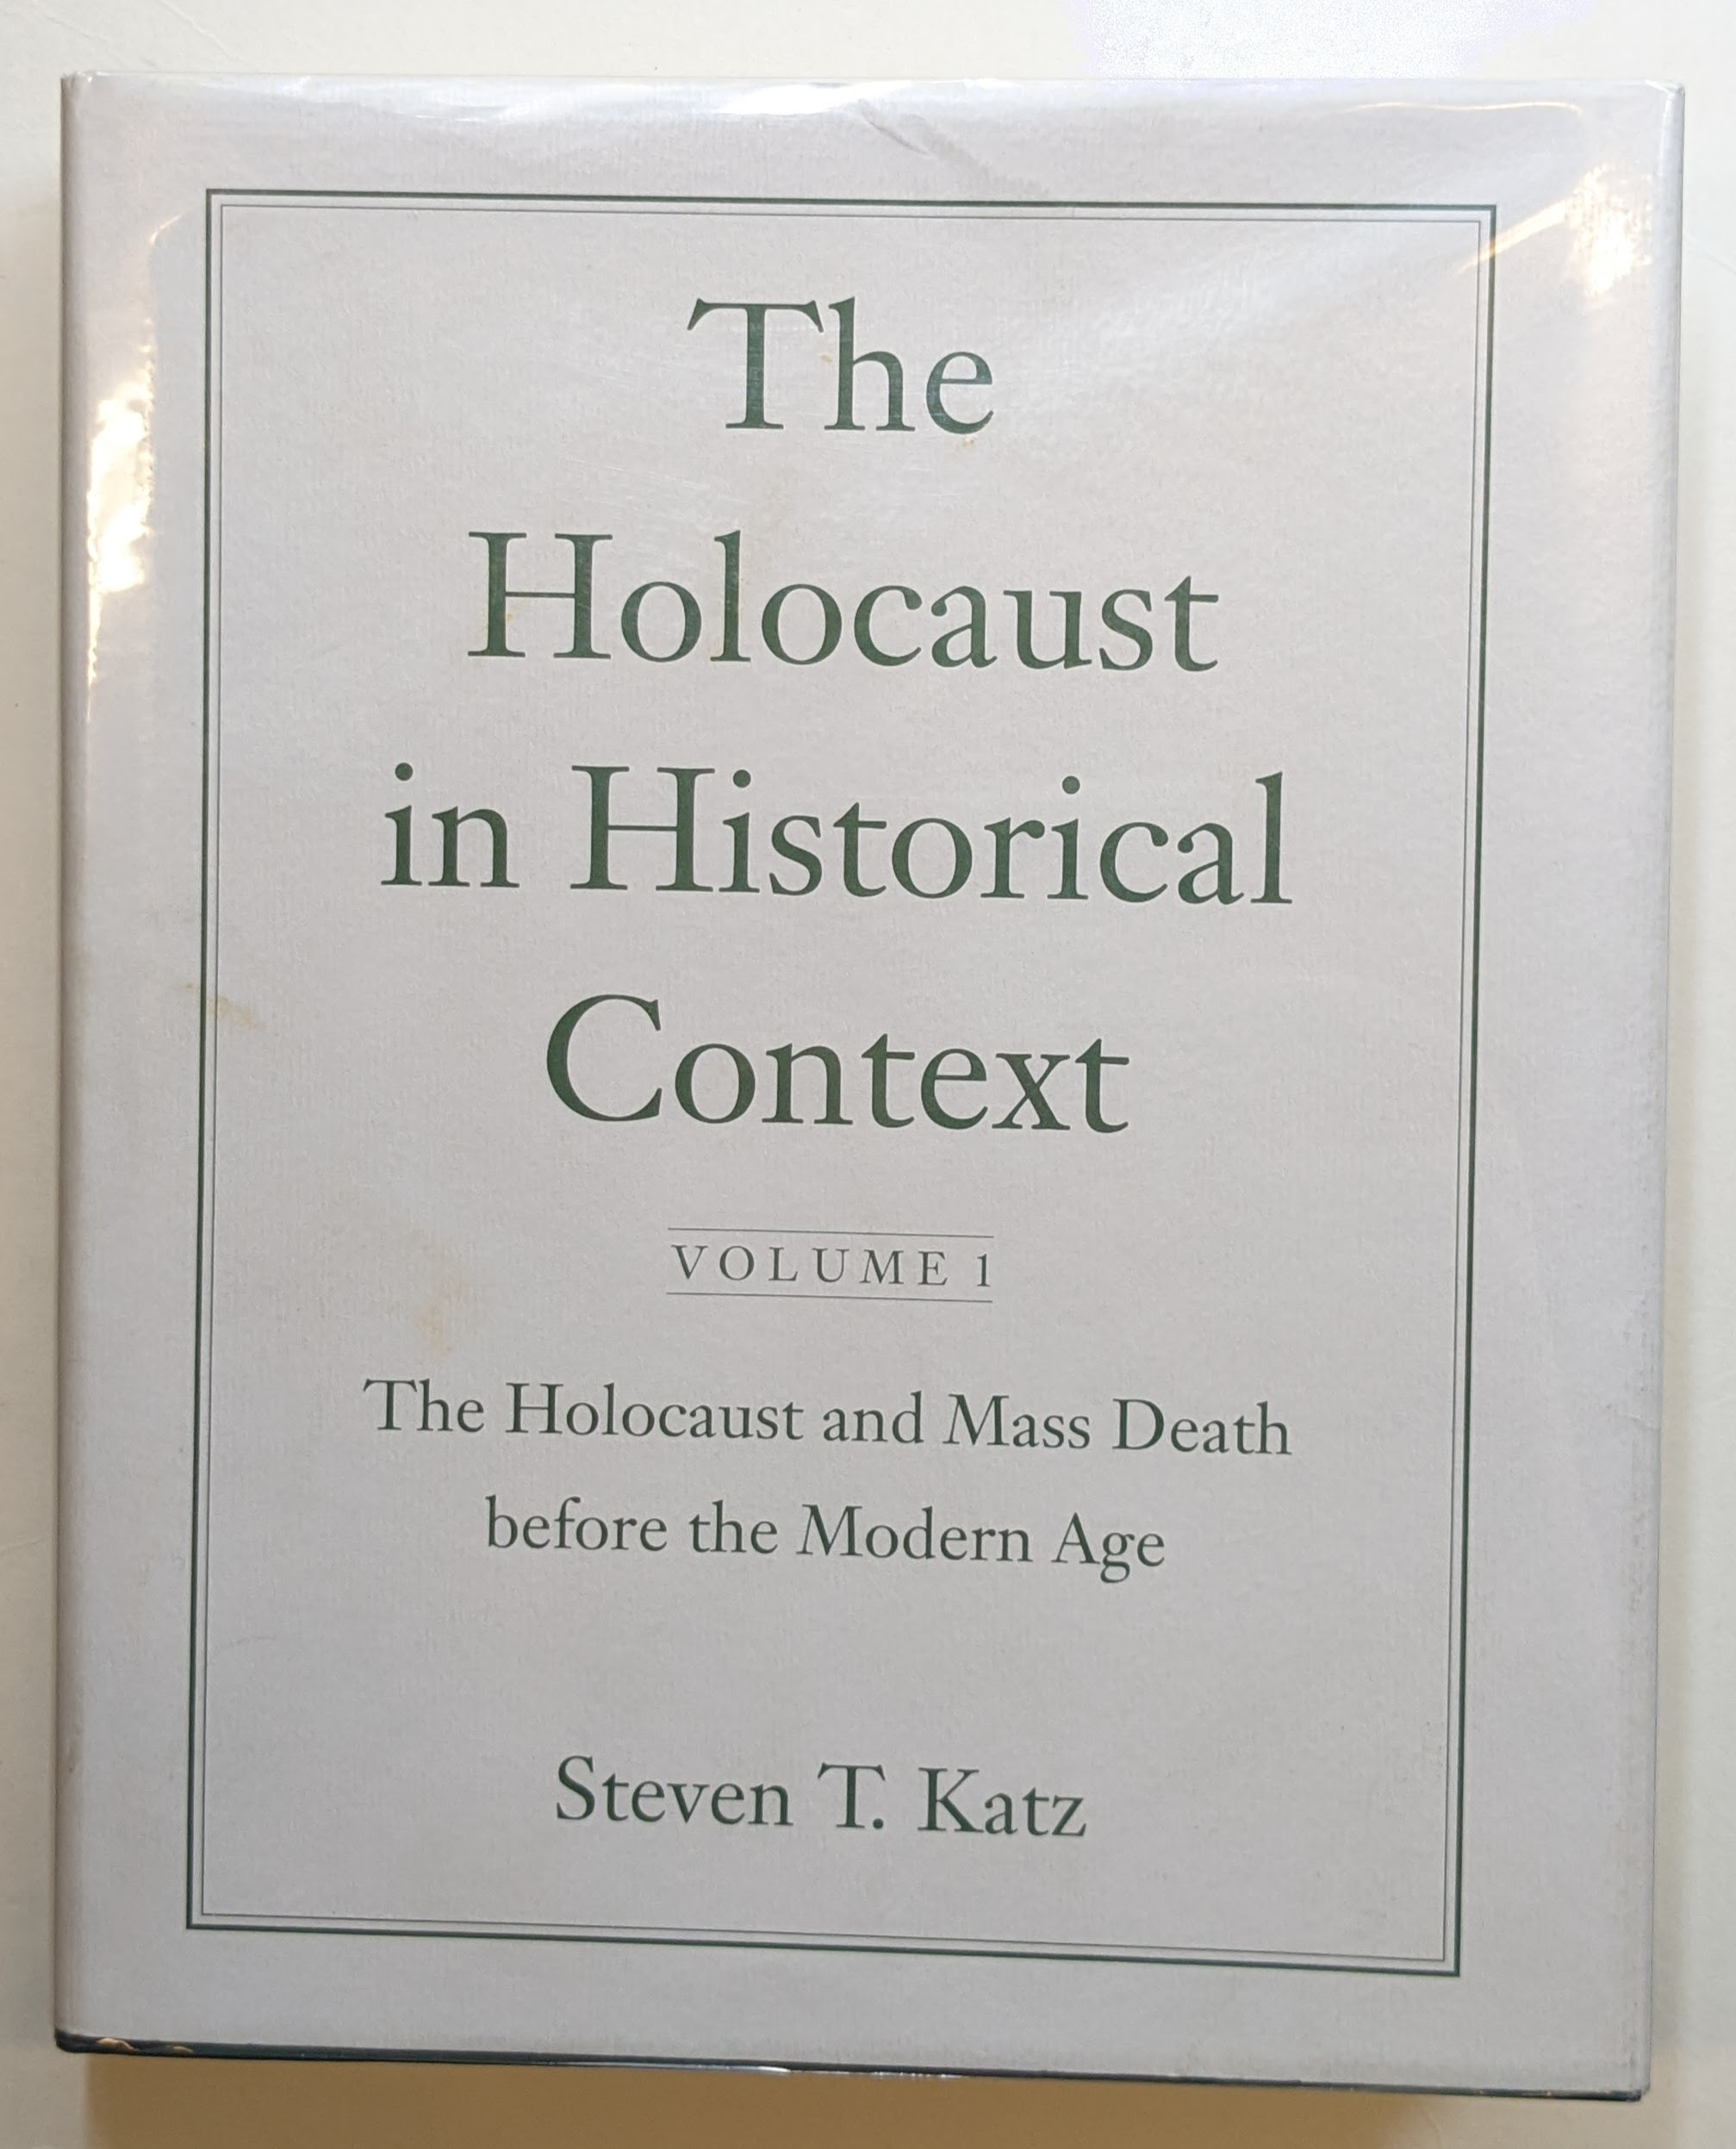 THE HOLOCAUST IN HISTORICAL CONTEXT VOLUME 1 : THE HOLOCAUST AND MASS DEATH BEFORE THE MODERN AGE - Katz, Steven T.